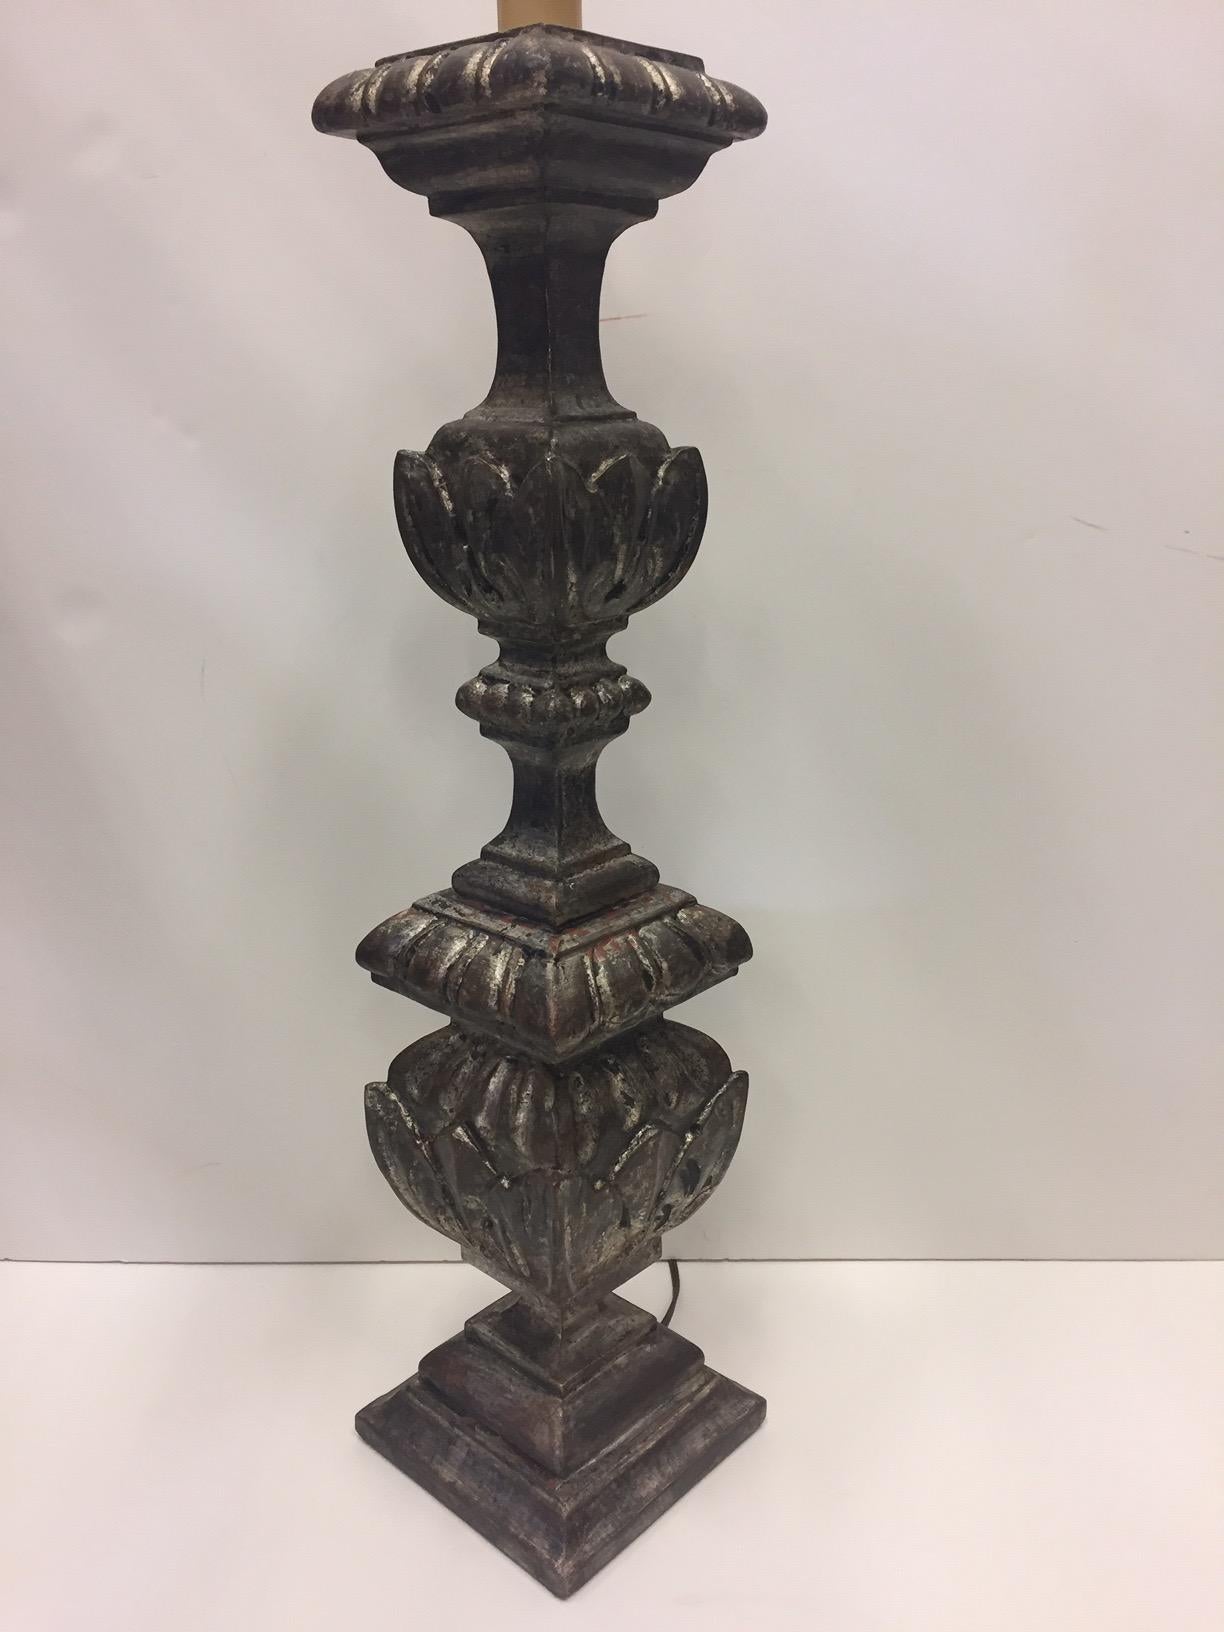 19th Century Impressive Tall Pair of Antique Continental Silverleaf Pricket Candlestick Lamps